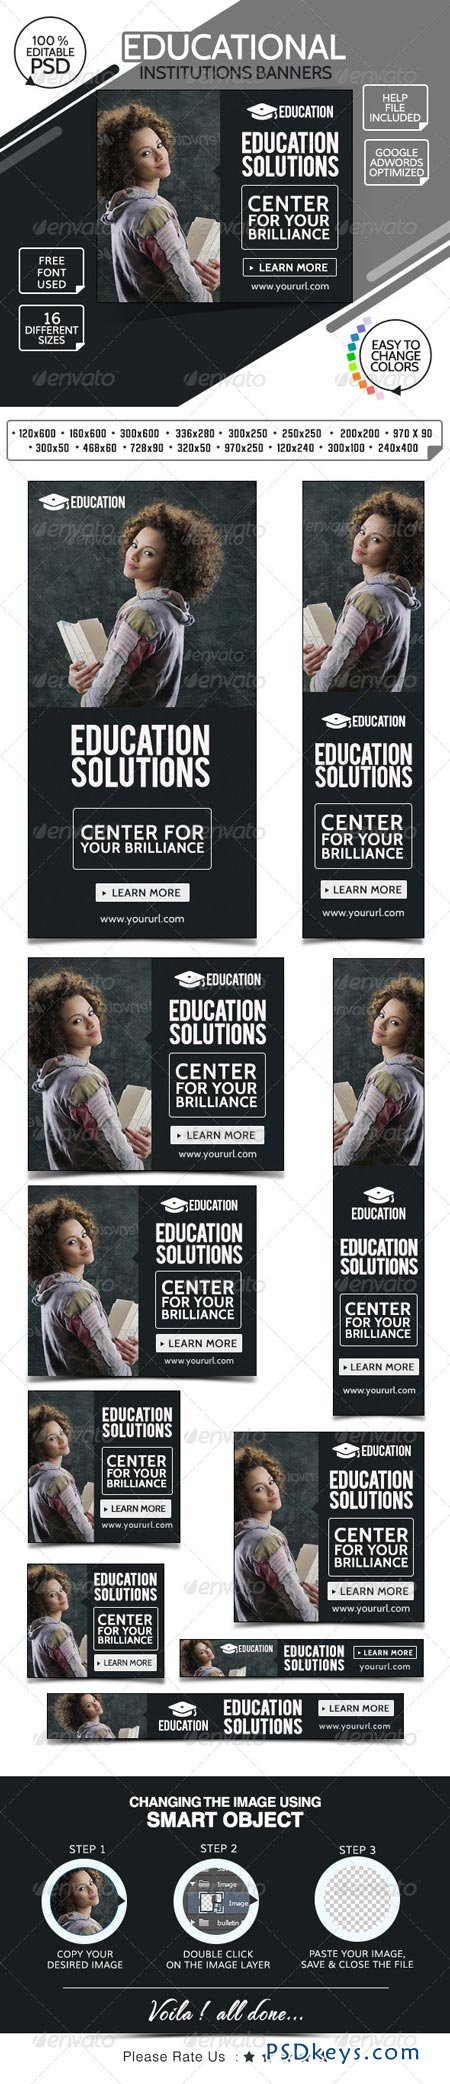 College & Education Banners 7678986